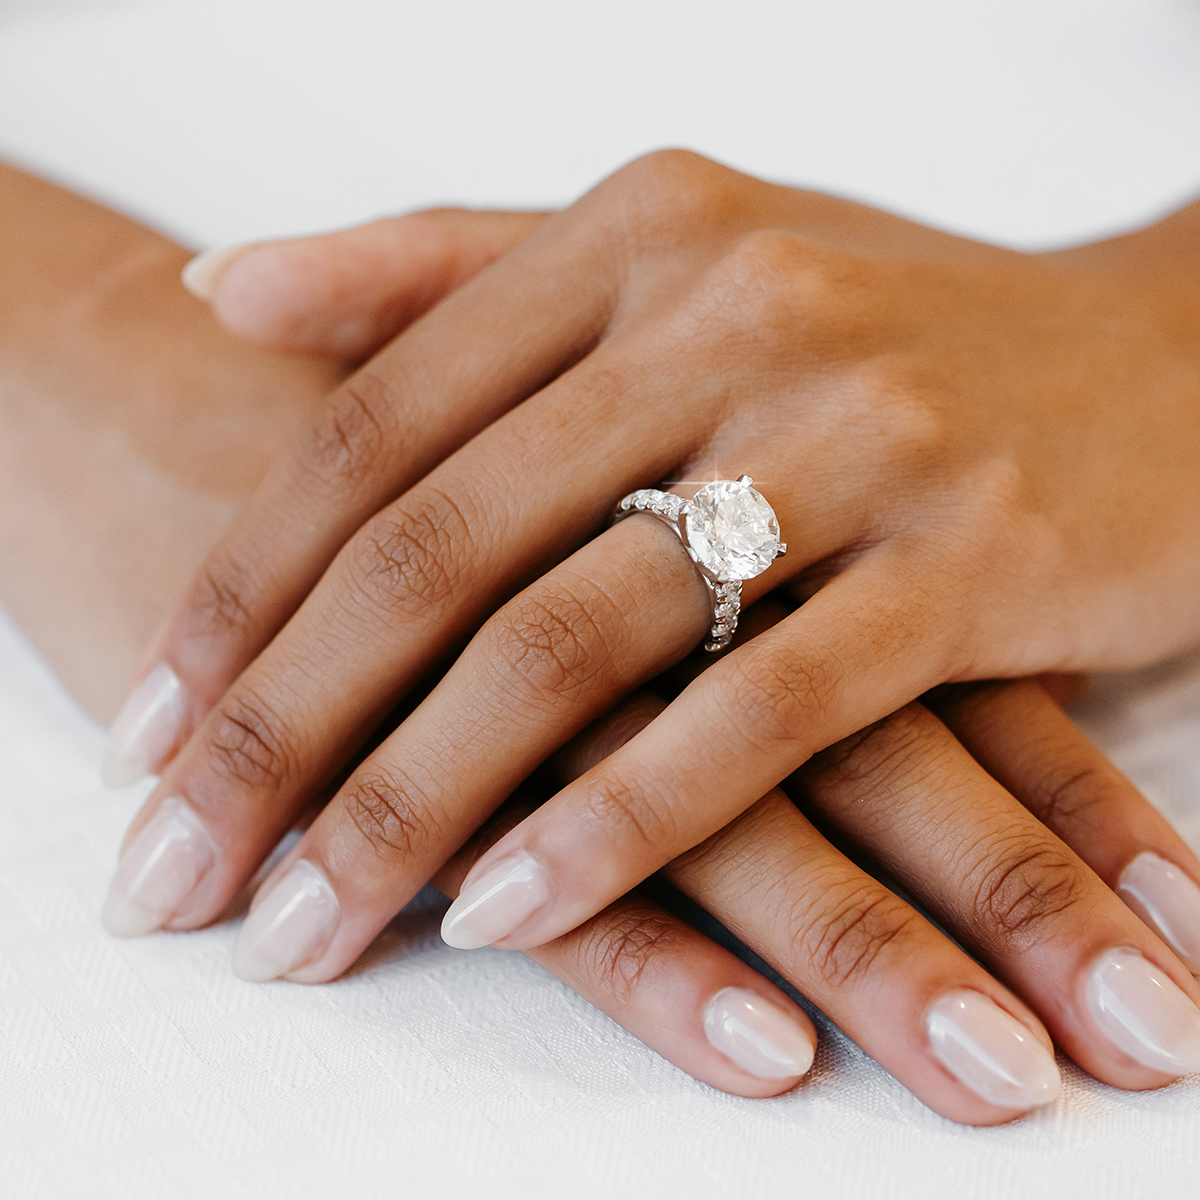 Find the perfect engagement ring at Josephs